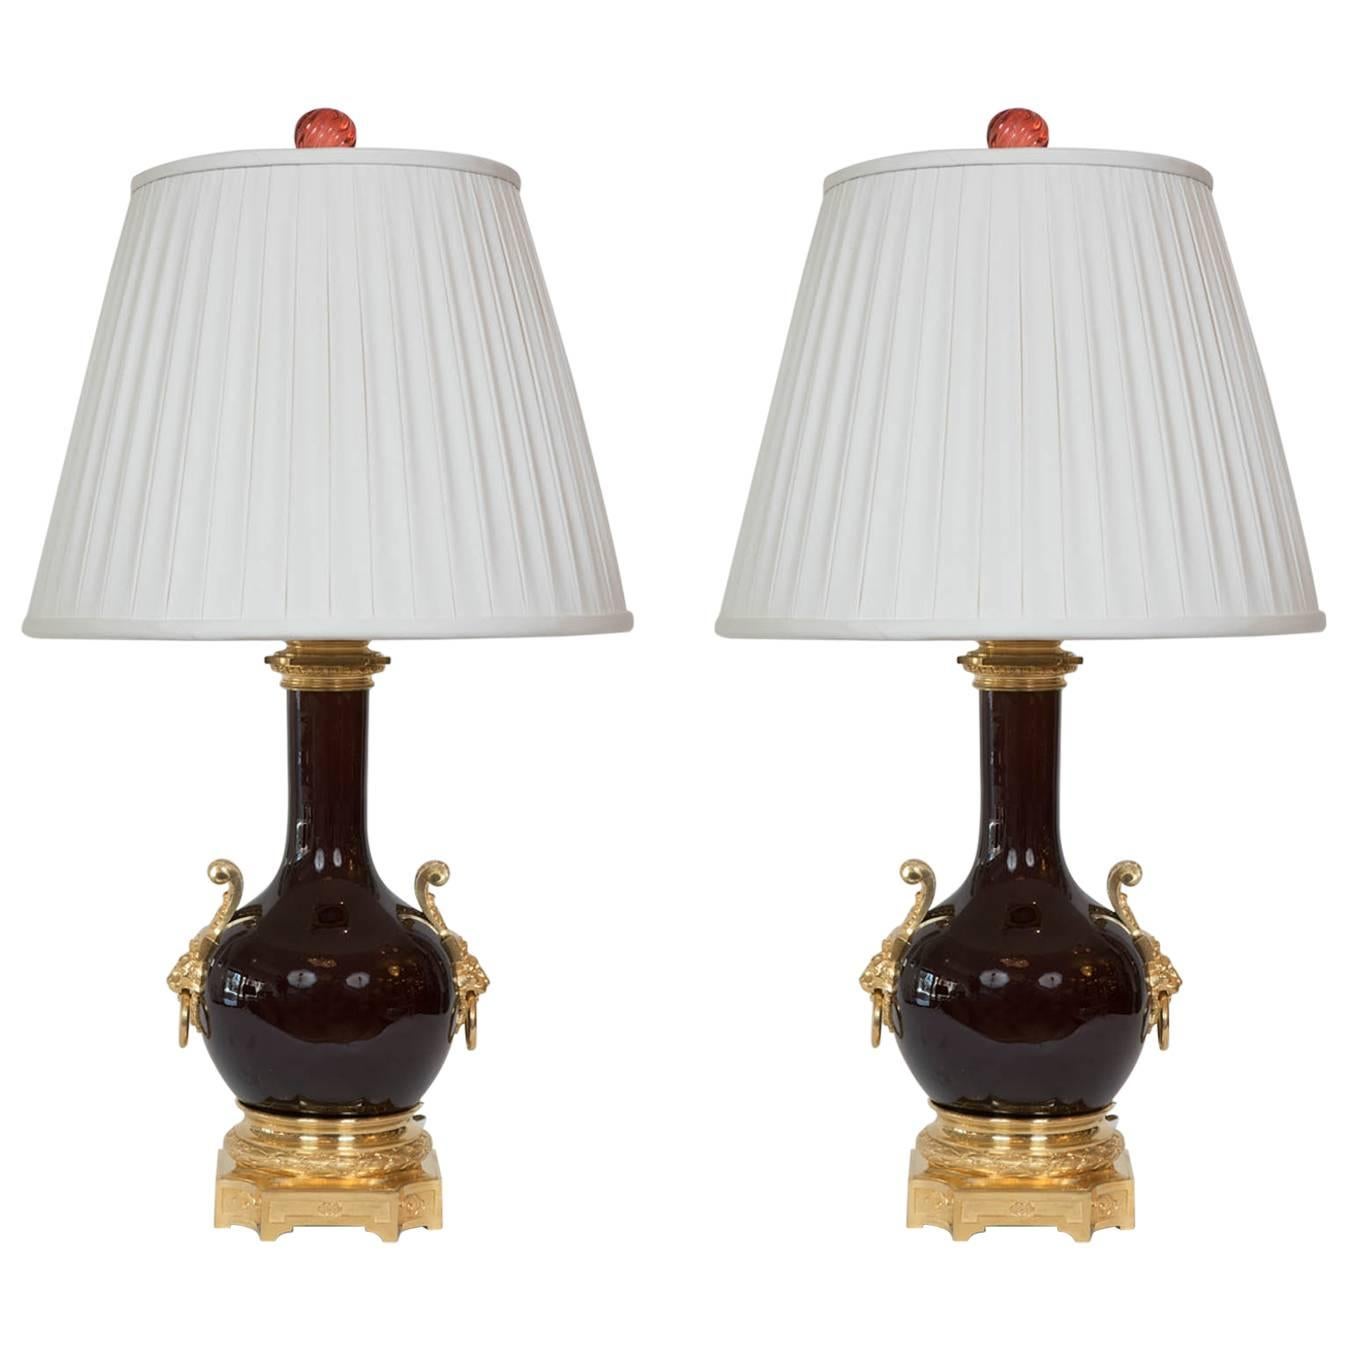 Pair of Chinese Oxblood Lamps with French Ormolu by Gagneau of France